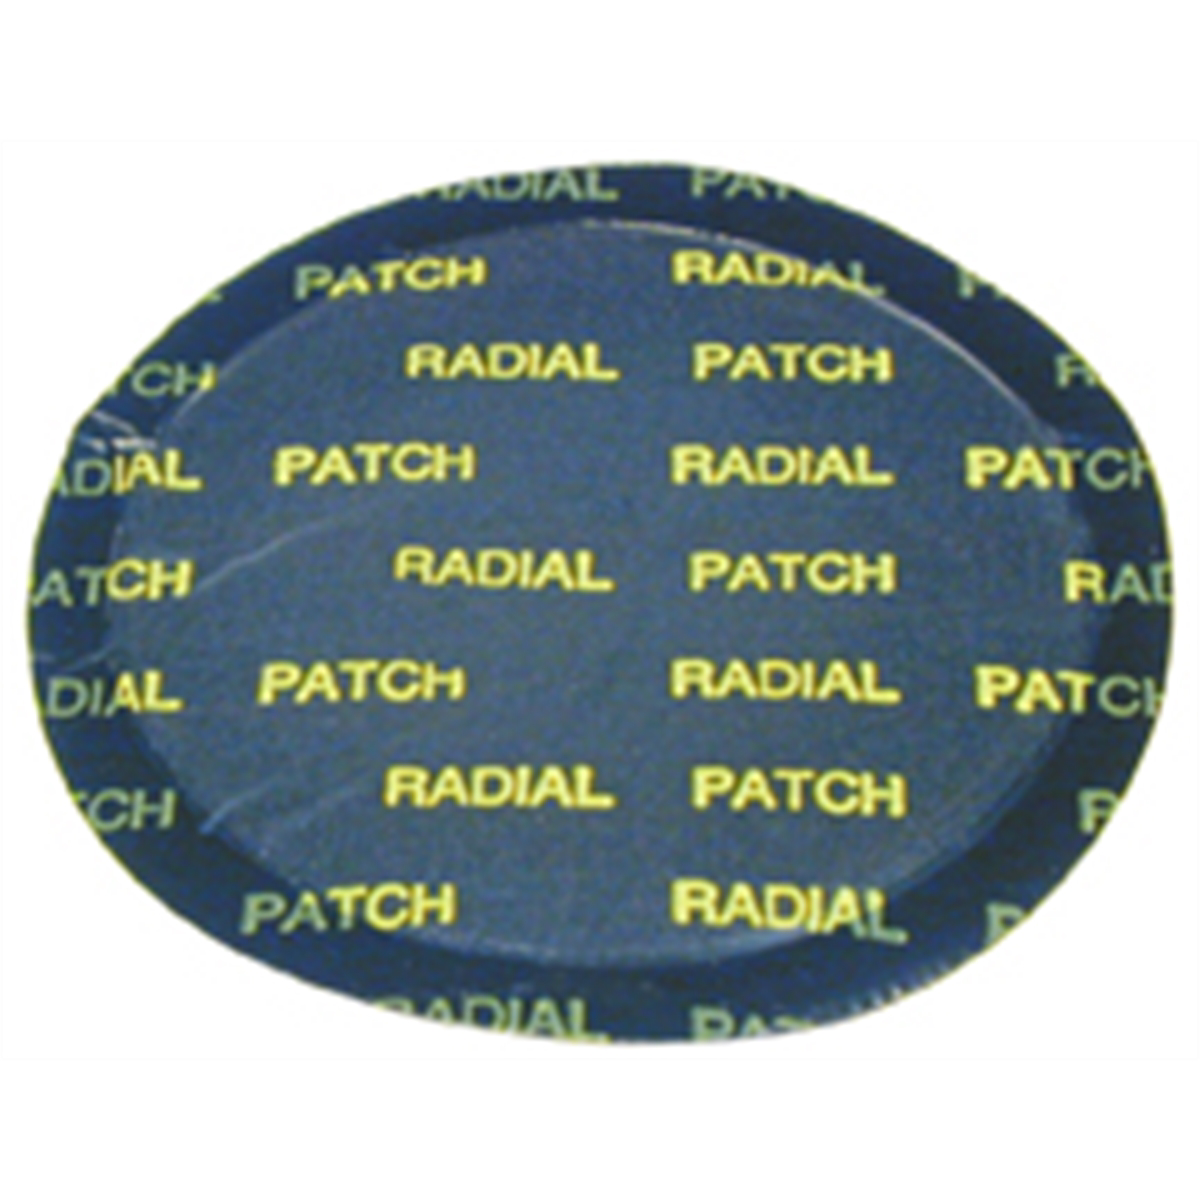 Radial Patch - 4-1/8 In - 10 Pcs.